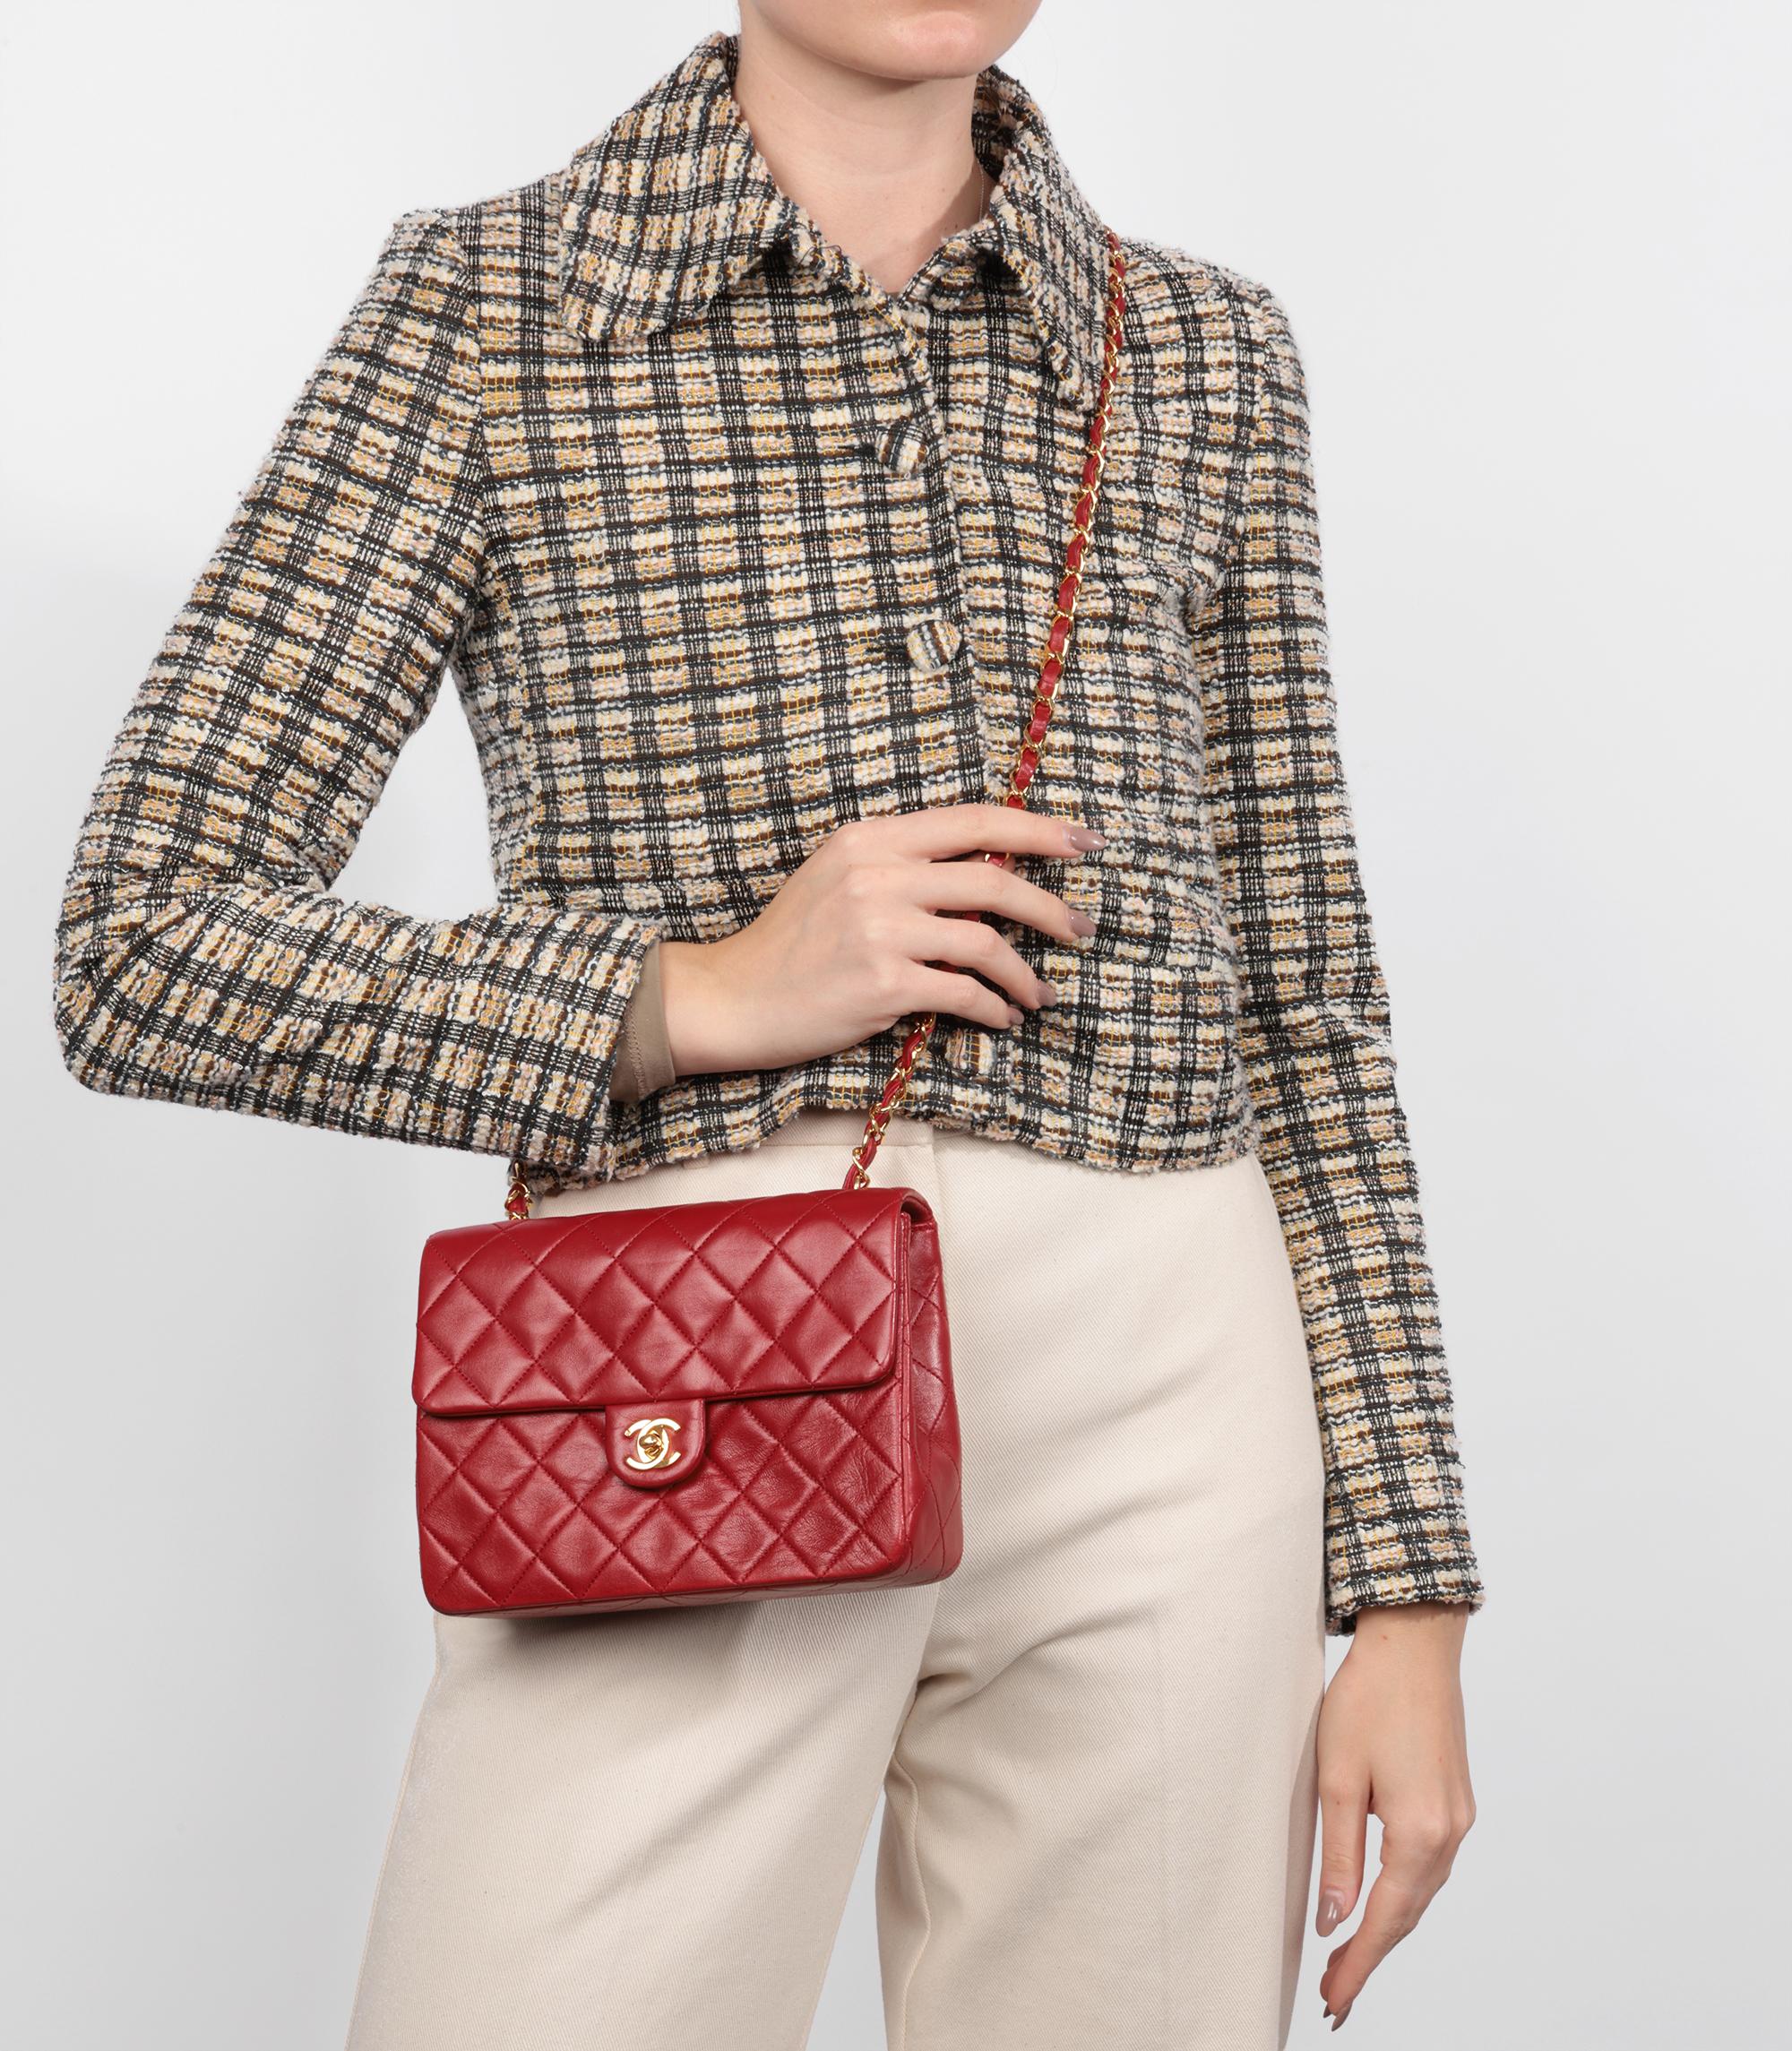 Chanel Red Quilted Lambskin Leather Square Mini Flap Bag

Brand- Chanel
Model- Square Mini Flap Bag
Product Type- Crossbody, Shoulder
Serial Number- 14*****
Age- Circa 1989
Accompanied By- Chanel Dust Bag, Authenticity Card
Colour- Red
Hardware-